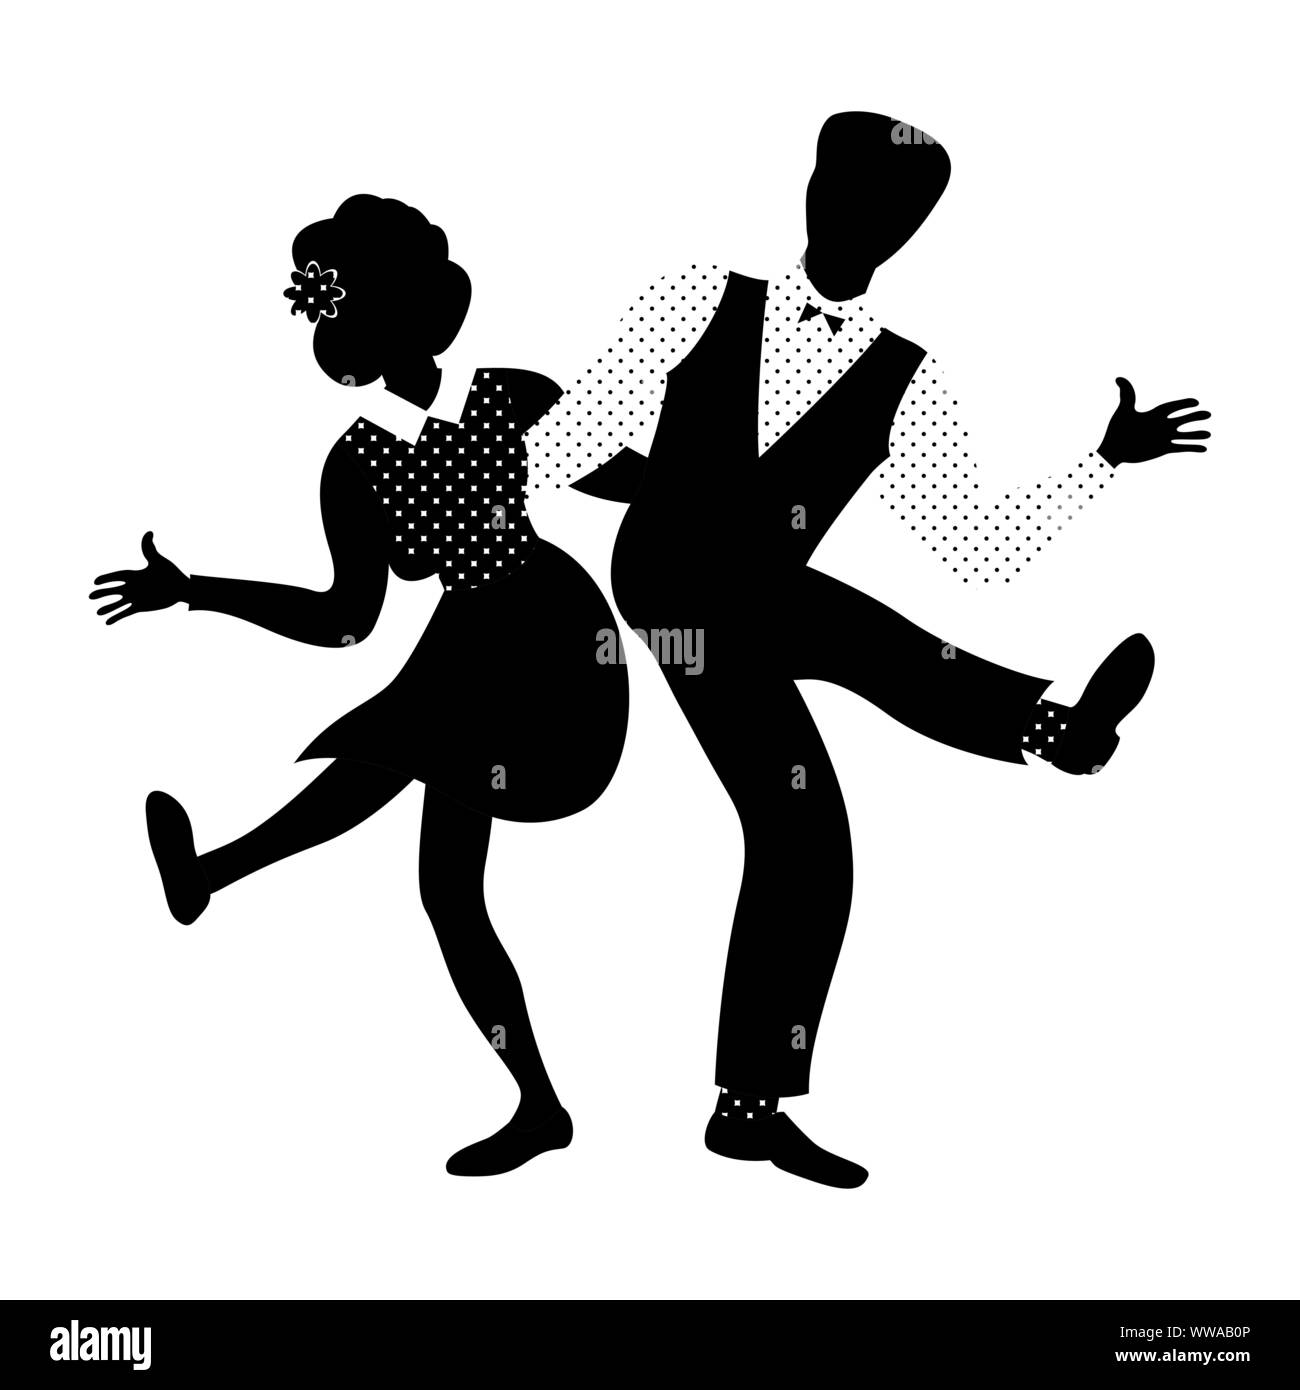 Couple of people dancing charleston. 1940s and 1950s style. Flat vector illustration in black and white colors. Stock Vector